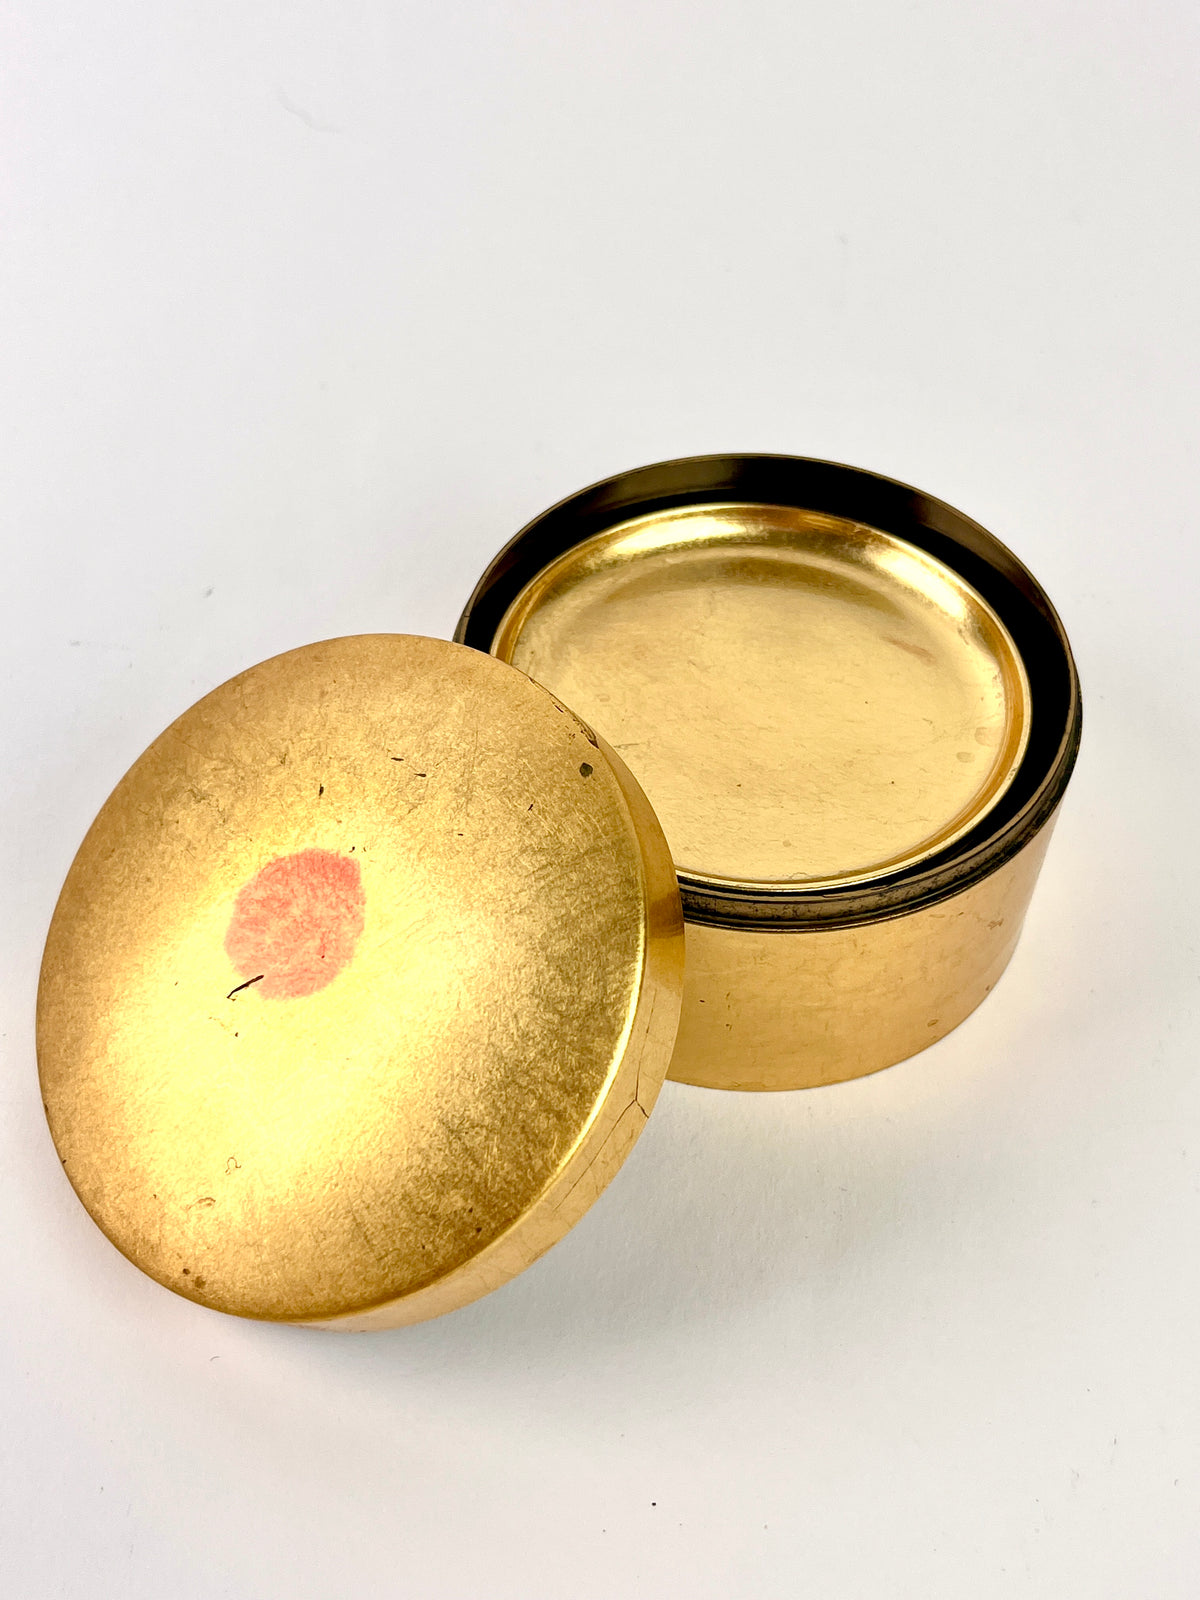 Vintage Gold Lacquered Coasters in Box